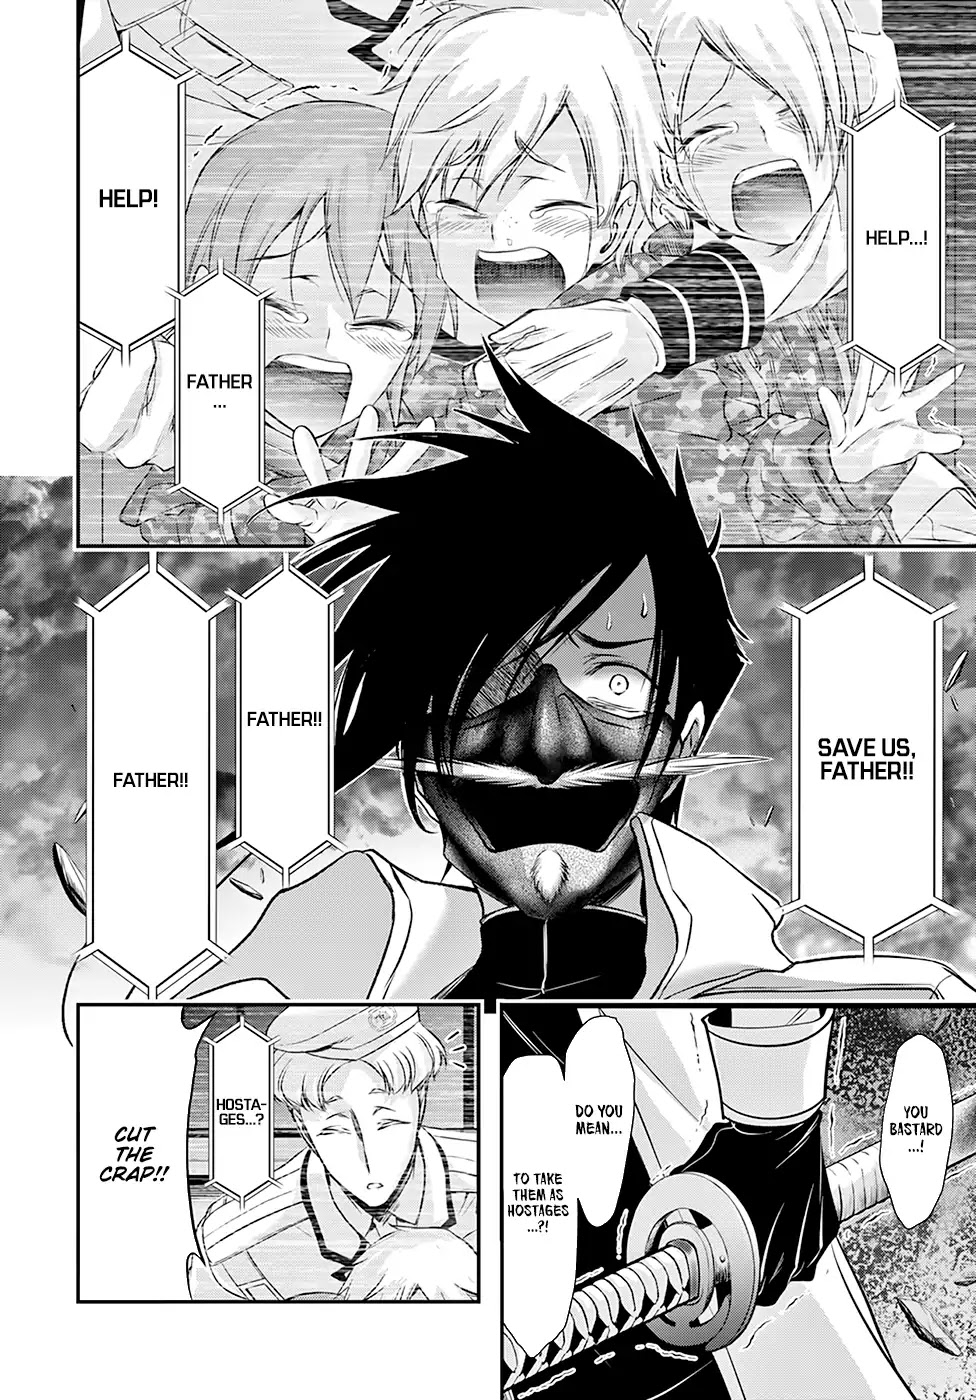 Plunderer Chapter 49: Betrayal